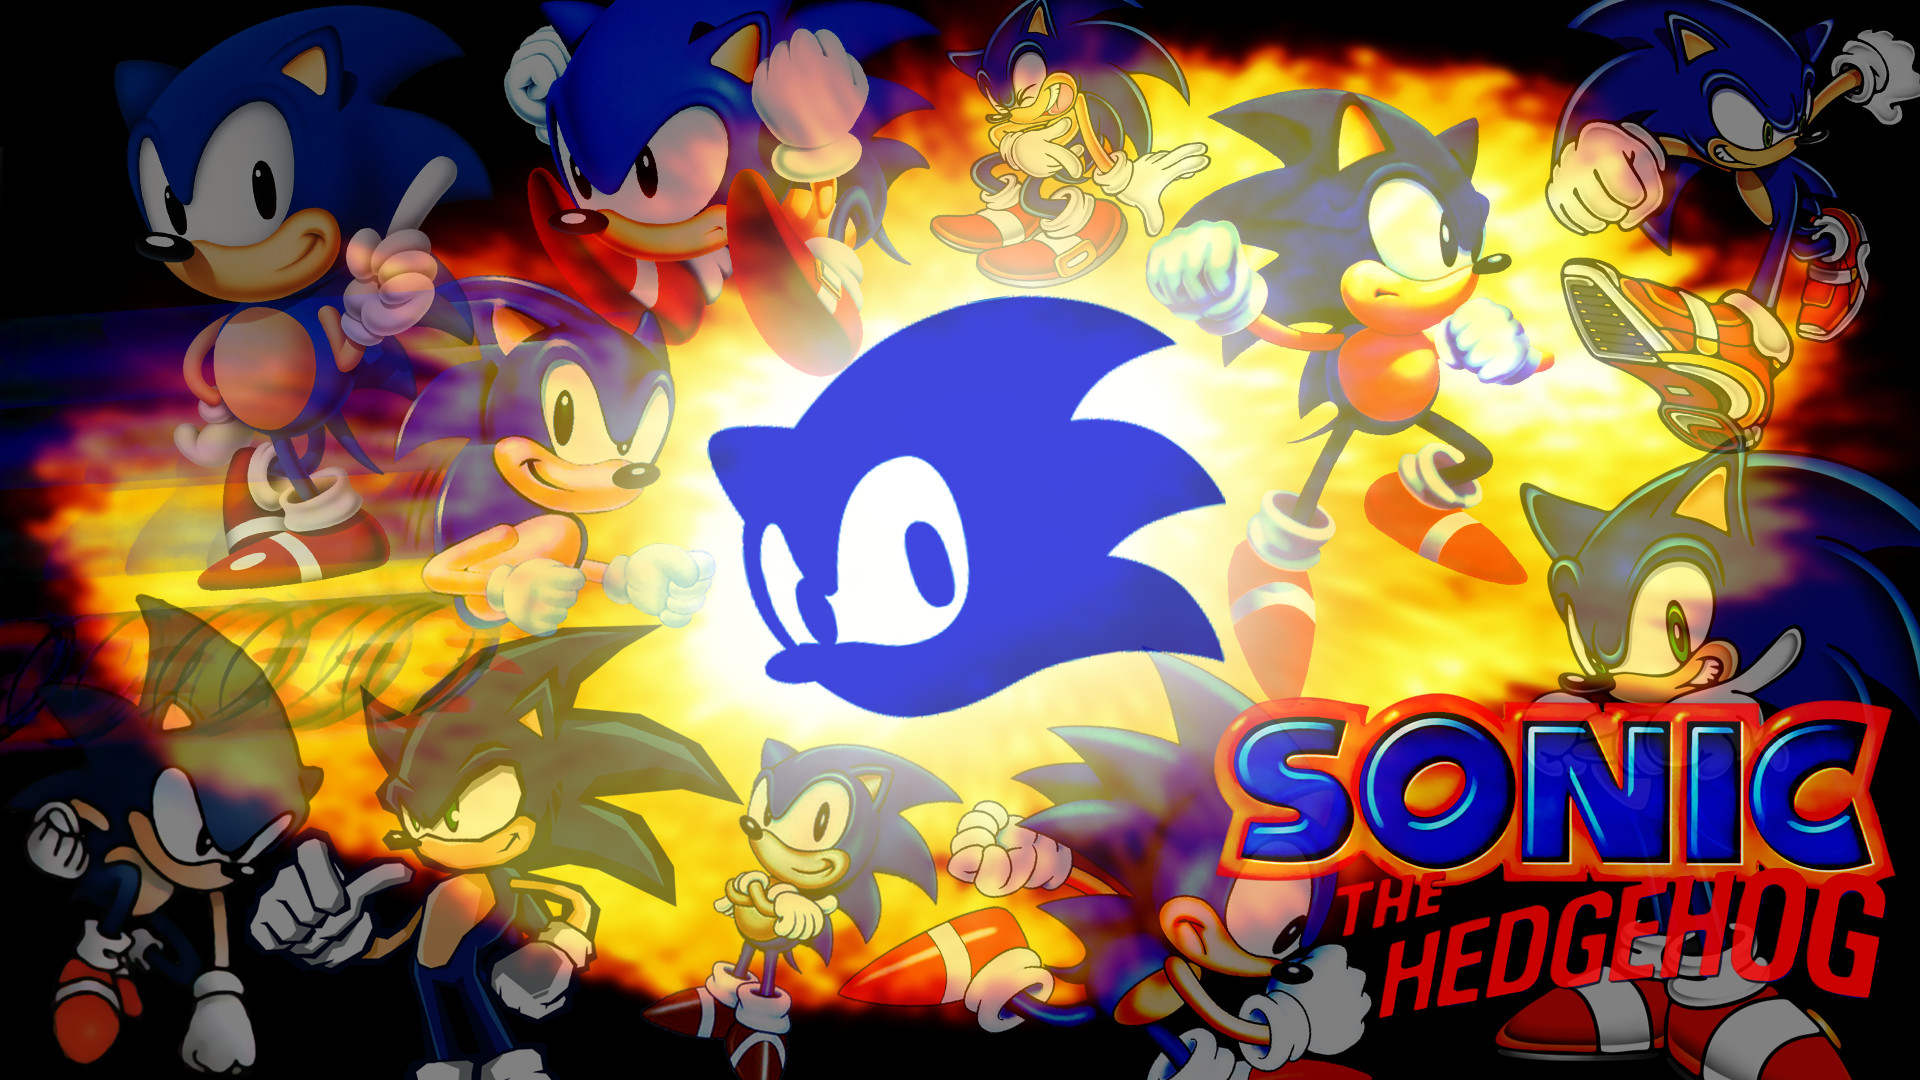 247 Sonic the Hedgehog HD Wallpapers Backgrounds – Wallpaper Abyss – Page 3